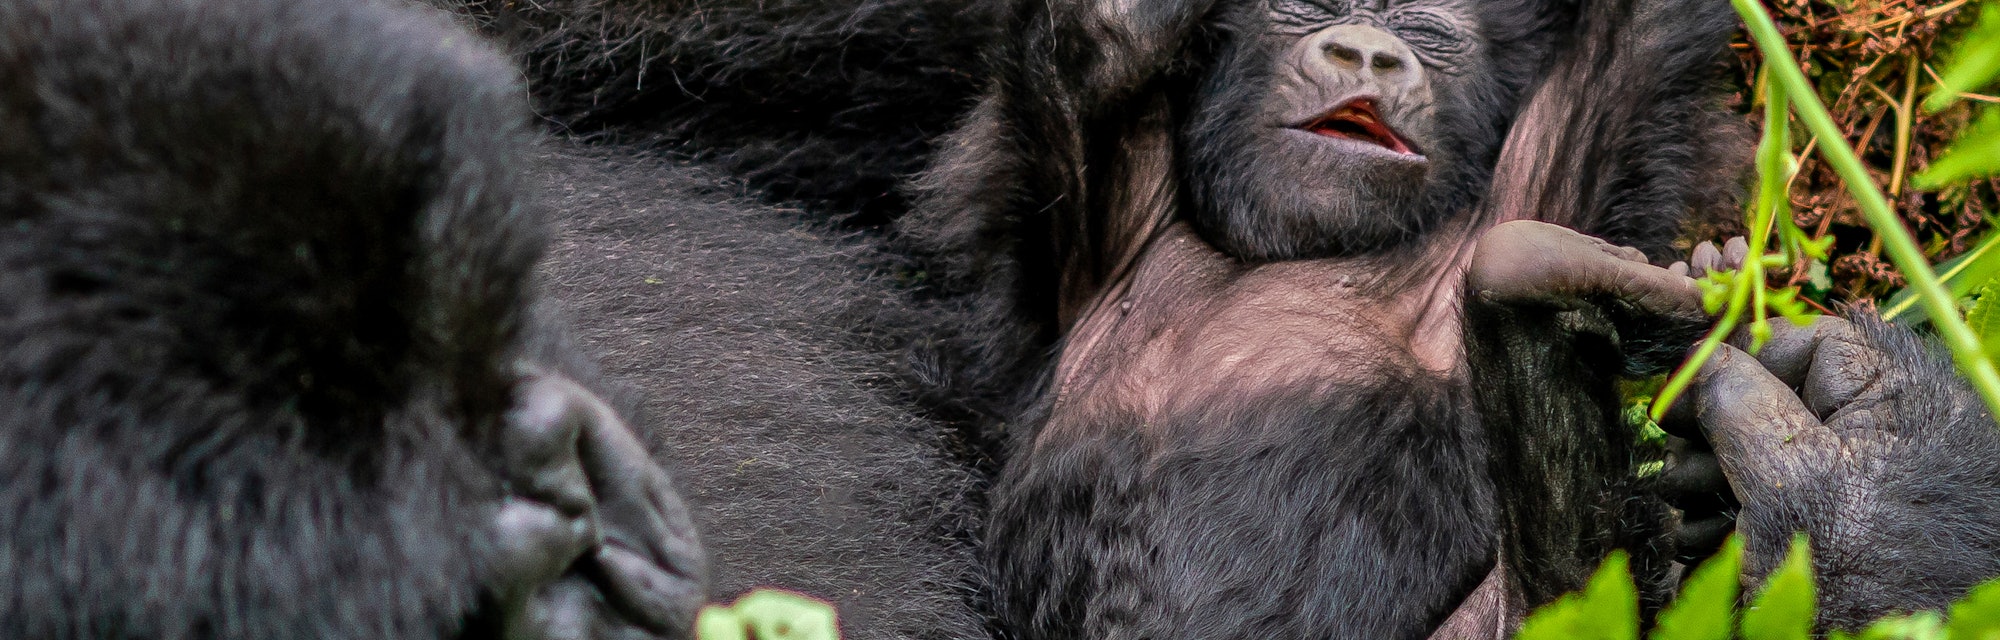 The newborn baby mountain gorilla is seen while it is lying in its mother's arms in front view. Its ...